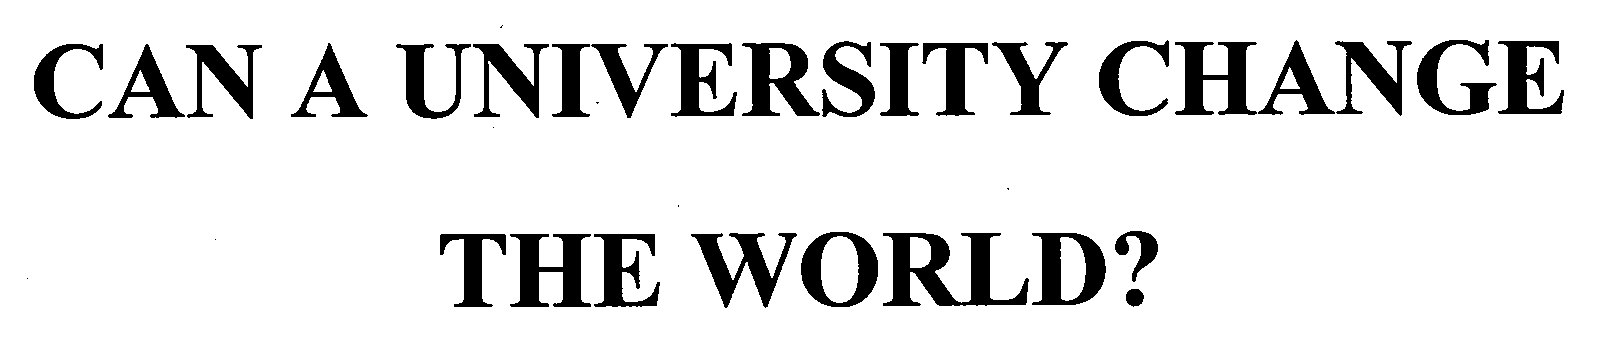  CAN A UNIVERSITY CHANGE THE WORLD?